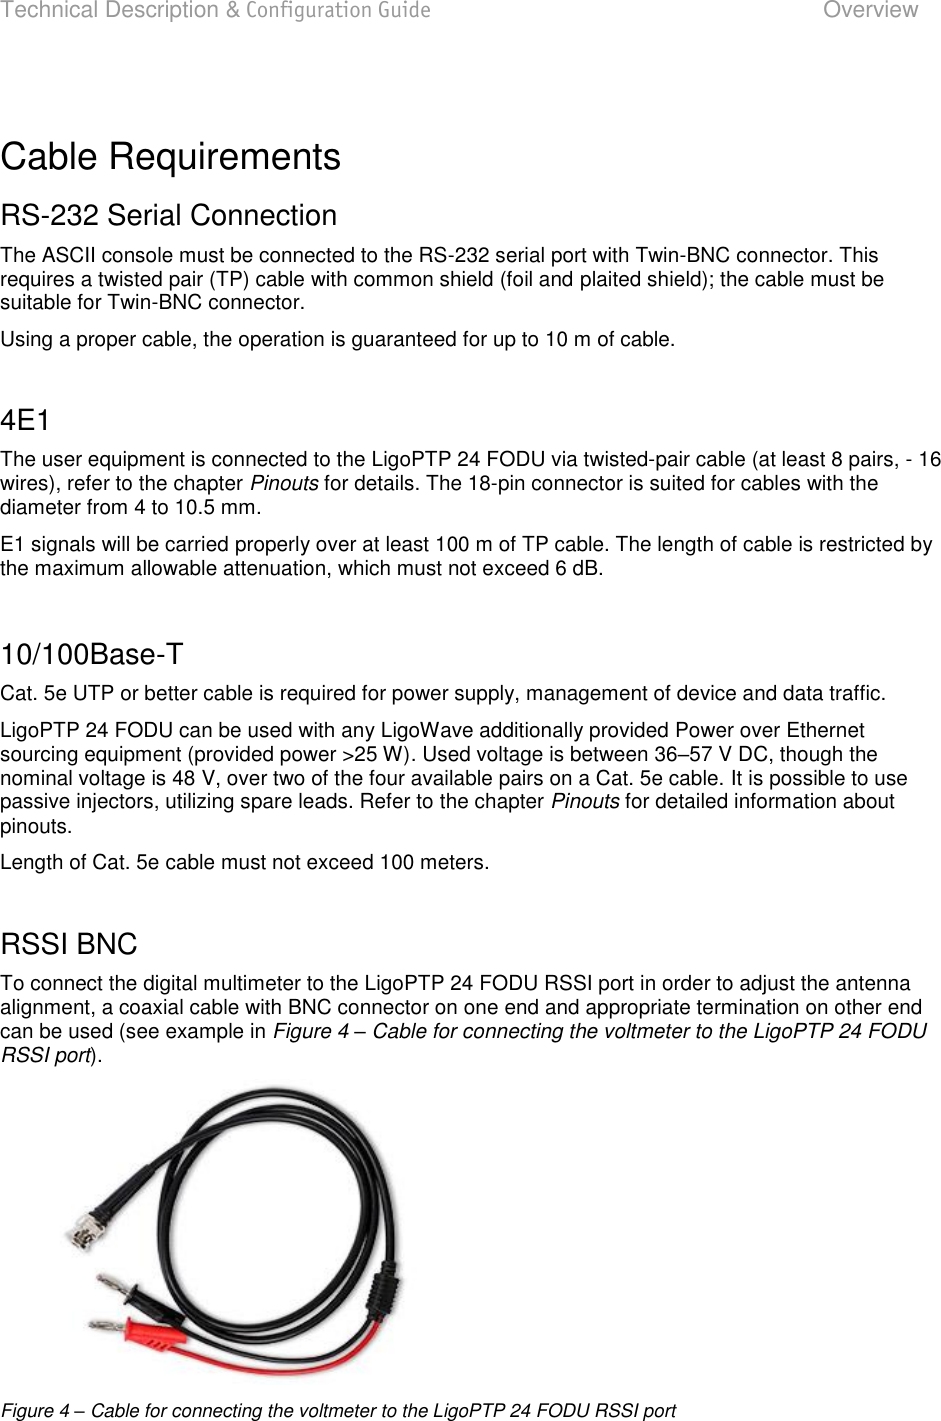 Technical Description &amp; Configuration Guide  Overview  LigoWave  Page 12  Cable Requirements RS-232 Serial Connection The ASCII console must be connected to the RS-232 serial port with Twin-BNC connector. This requires a twisted pair (TP) cable with common shield (foil and plaited shield); the cable must be suitable for Twin-BNC connector. Using a proper cable, the operation is guaranteed for up to 10 m of cable.  4E1 The user equipment is connected to the LigoPTP 24 FODU via twisted-pair cable (at least 8 pairs, - 16 wires), refer to the chapter Pinouts for details. The 18-pin connector is suited for cables with the diameter from 4 to 10.5 mm. E1 signals will be carried properly over at least 100 m of TP cable. The length of cable is restricted by the maximum allowable attenuation, which must not exceed 6 dB.  10/100Base-T Cat. 5e UTP or better cable is required for power supply, management of device and data traffic. LigoPTP 24 FODU can be used with any LigoWave additionally provided Power over Ethernet sourcing equipment (provided power &gt;25 W). Used voltage is between 3657 V DC, though the nominal voltage is 48 V, over two of the four available pairs on a Cat. 5e cable. It is possible to use passive injectors, utilizing spare leads. Refer to the chapter Pinouts for detailed information about pinouts. Length of Cat. 5e cable must not exceed 100 meters.   RSSI BNC To connect the digital multimeter to the LigoPTP 24 FODU RSSI port in order to adjust the antenna alignment, a coaxial cable with BNC connector on one end and appropriate termination on other end can be used (see example in Figure 4 – Cable for connecting the voltmeter to the LigoPTP 24 FODU RSSI port).   Figure 4 – Cable for connecting the voltmeter to the LigoPTP 24 FODU RSSI port  